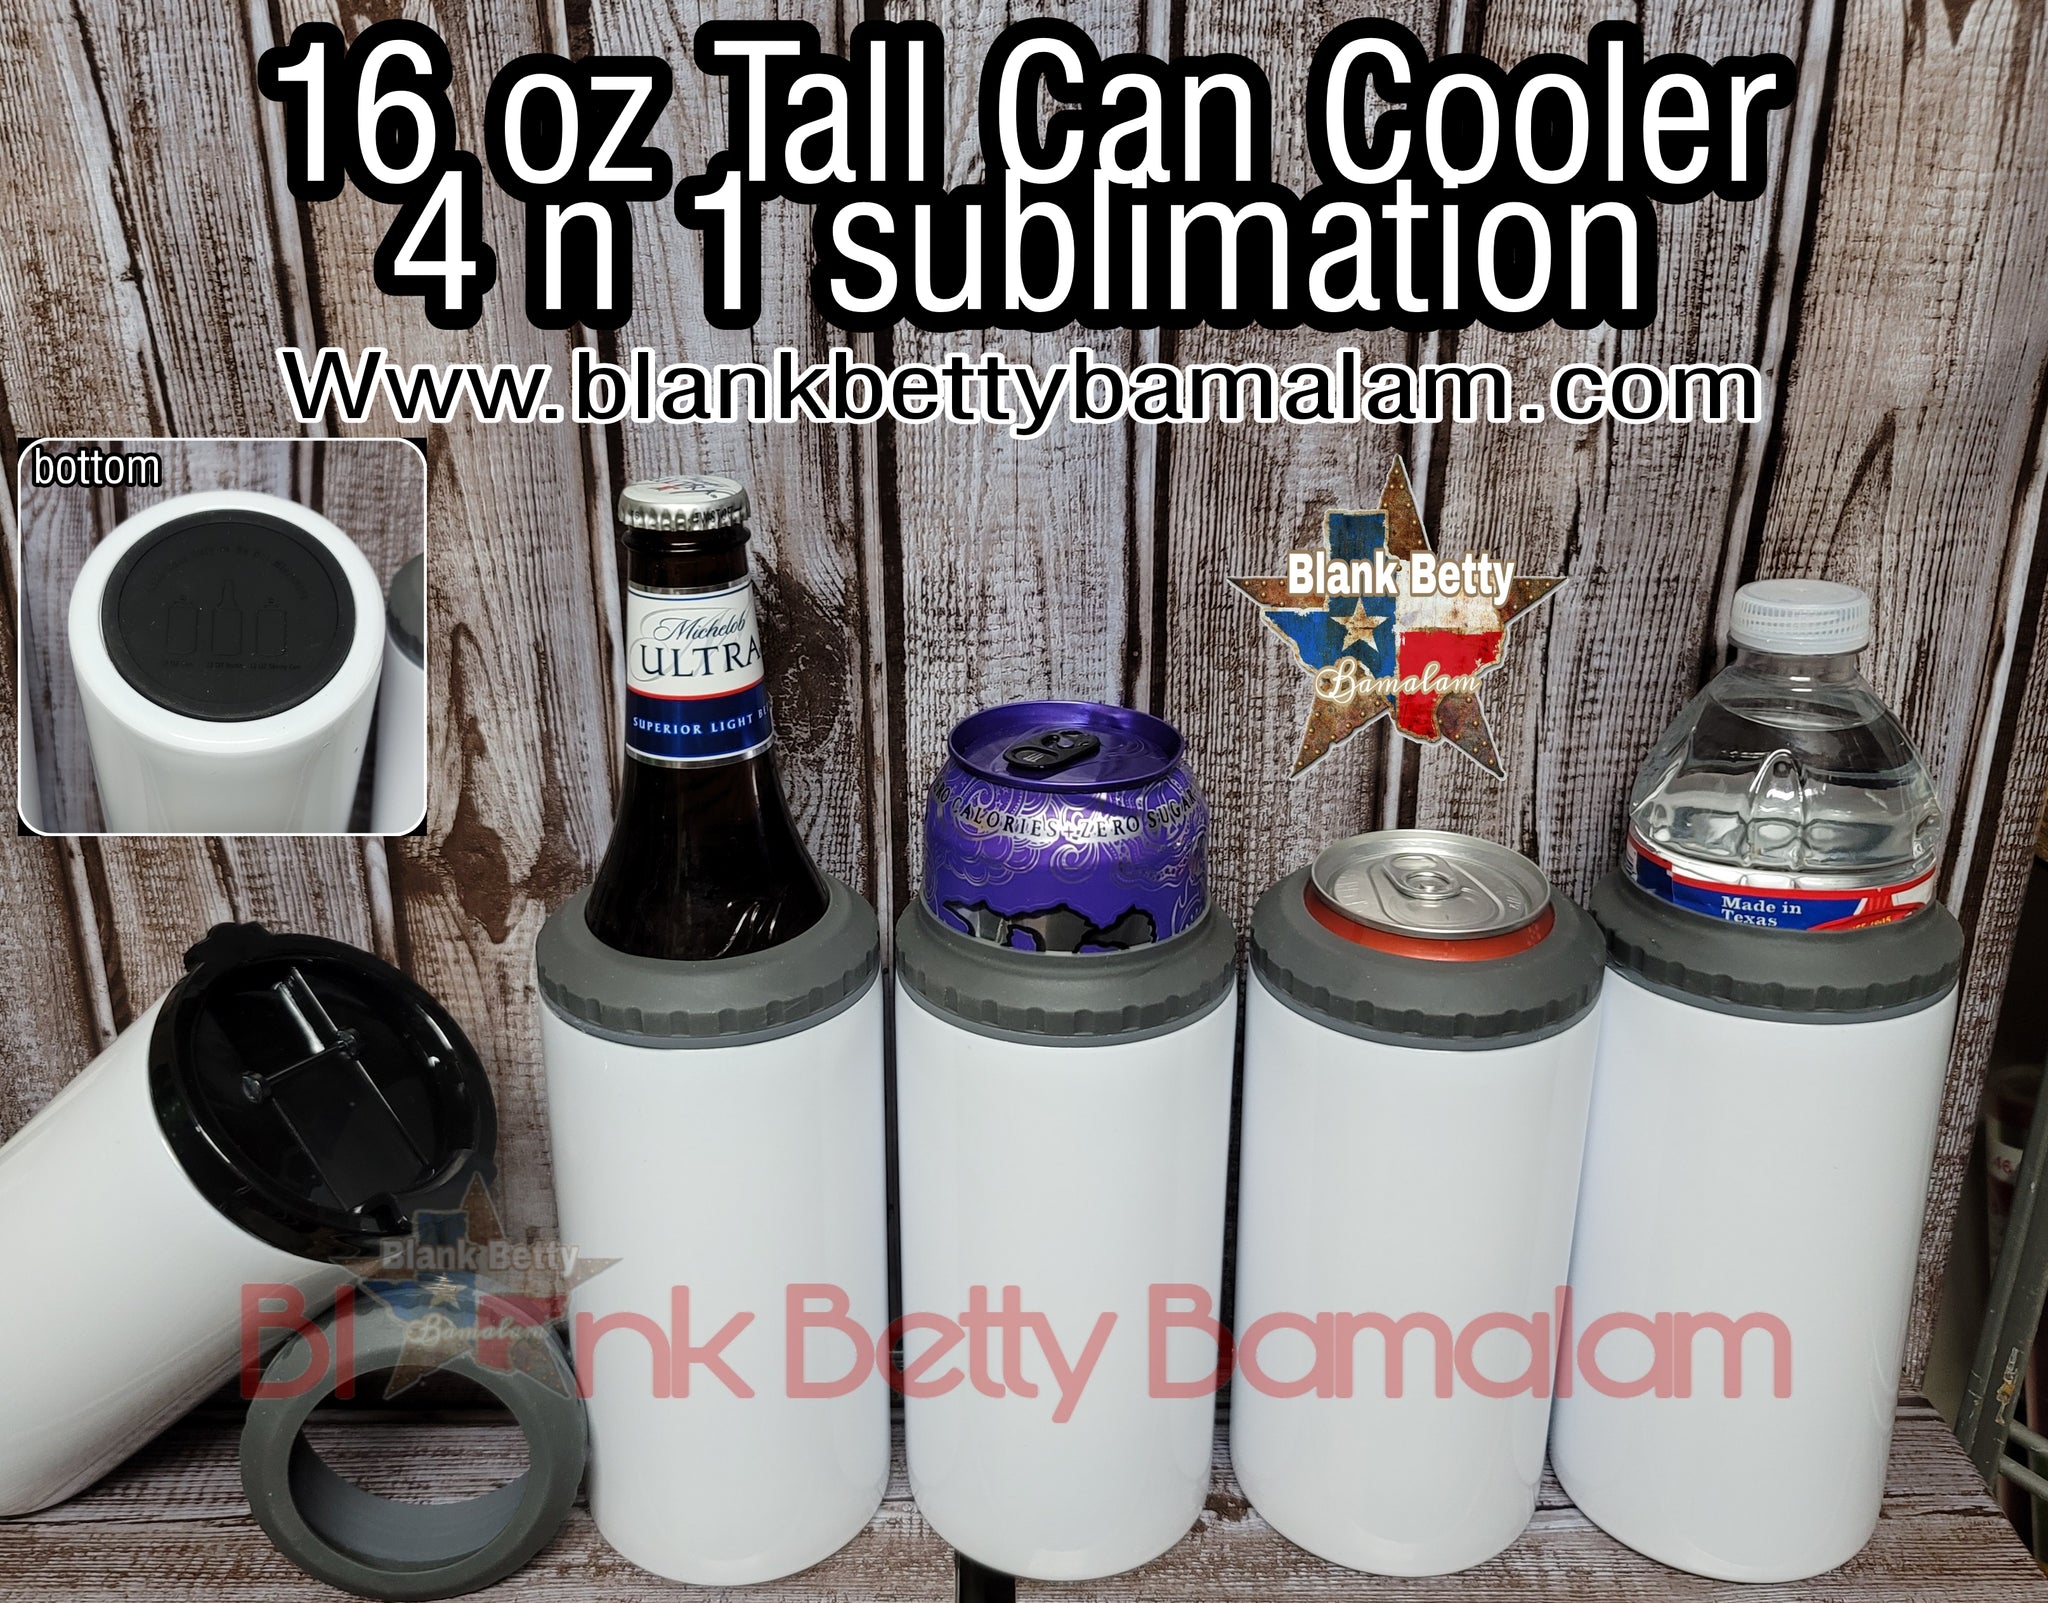 16 oz TALL CC 4 in 1 sublimation (no longer comes with the rubber